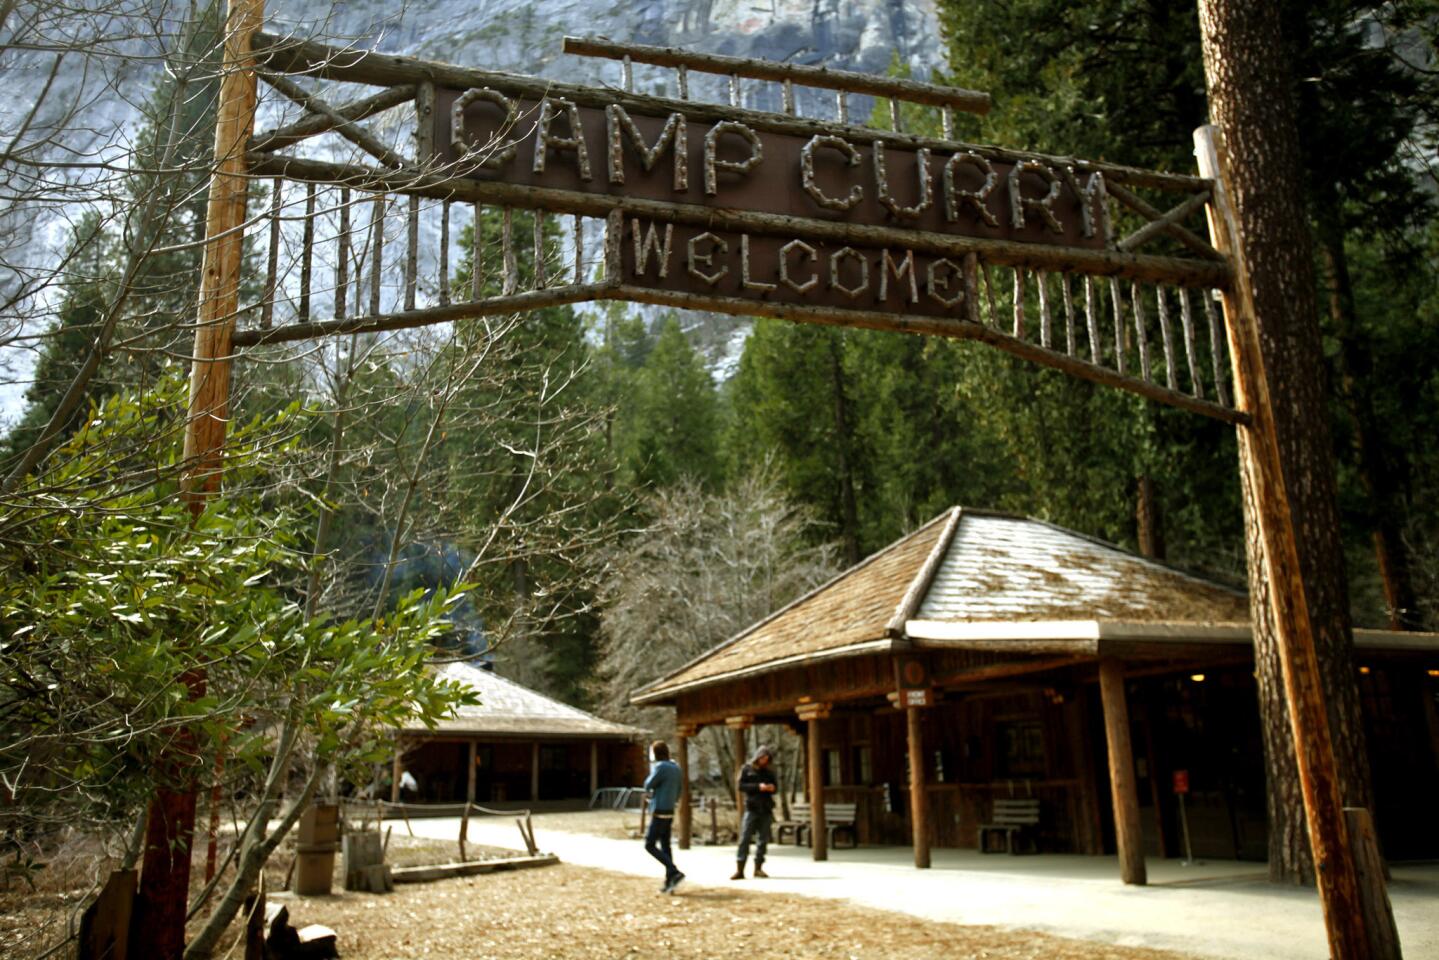 The historic wood sign at Camp Curry greets visitors at the famous lodging site in Yosemite. Construction and mitigation measures are progressing at Camp Curry, a year after hantavirus sickened and killed several visitors staying in some of the signature tent cabins.